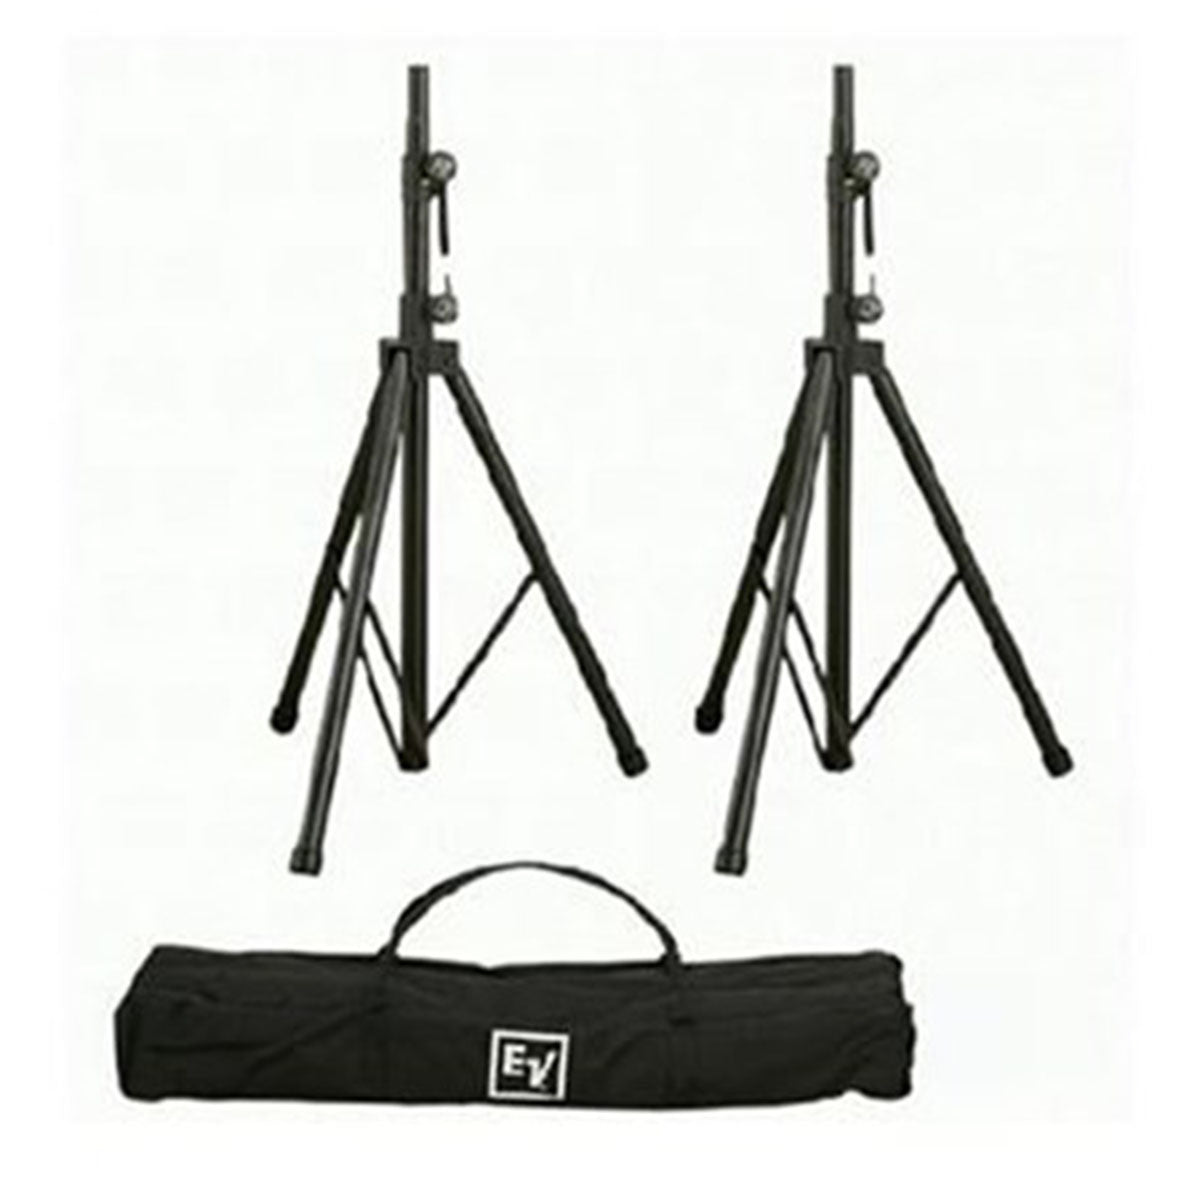 Electro-Voice EV TSP-1 Speaker Stand Pack - 2x TSS-1 Tripod Stands w/ Carrying Case